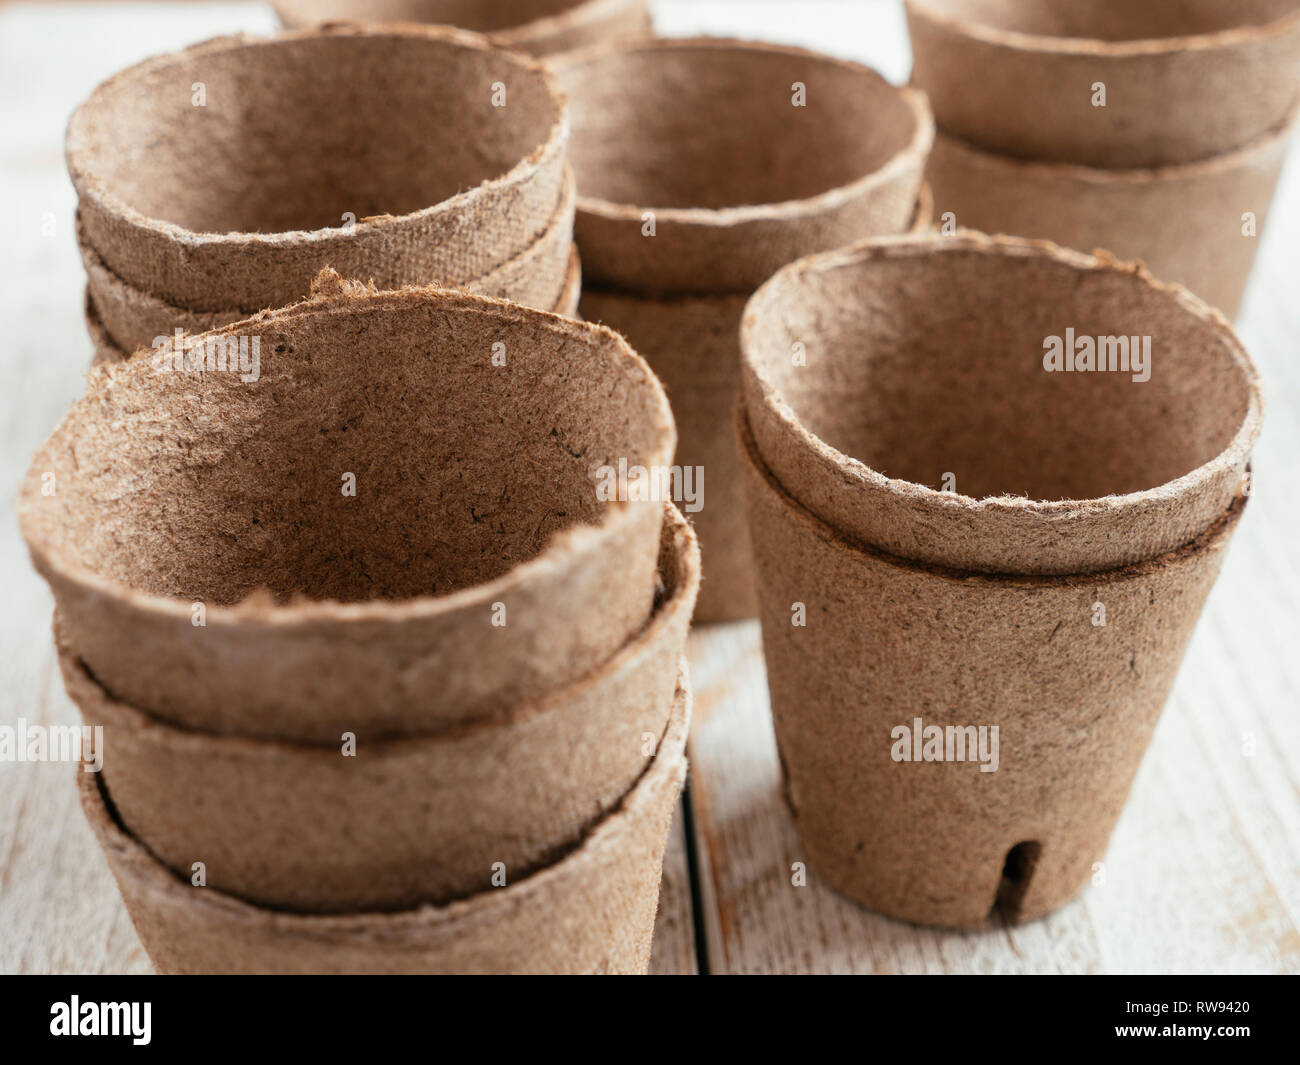 biodegradable peat planting pots, which help to reduce plastic use in gardening. Stock Photo